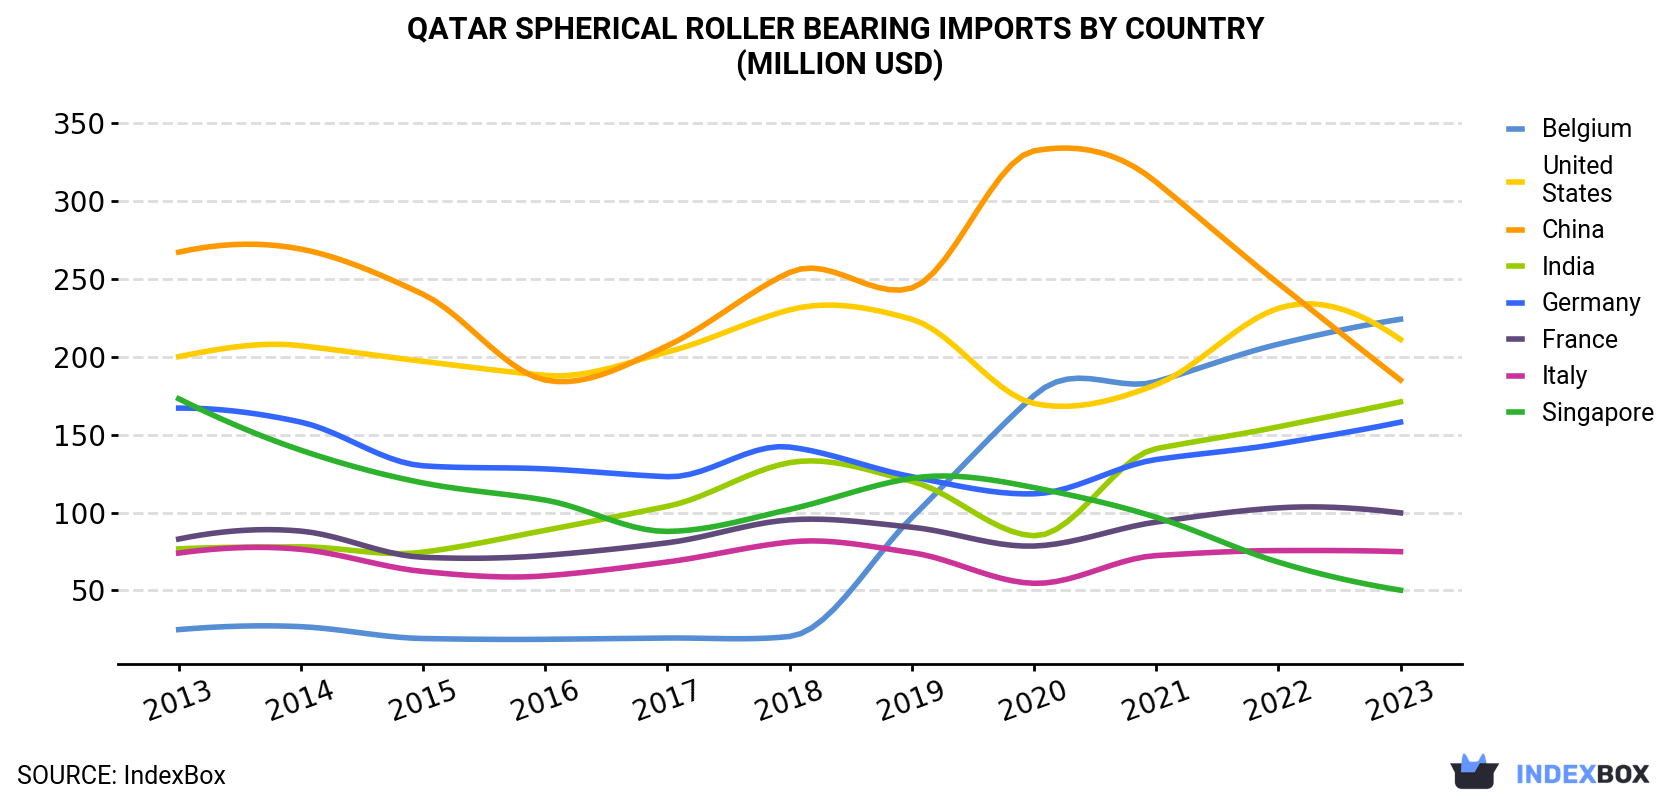 Qatar Spherical Roller Bearing Imports By Country (Million USD)